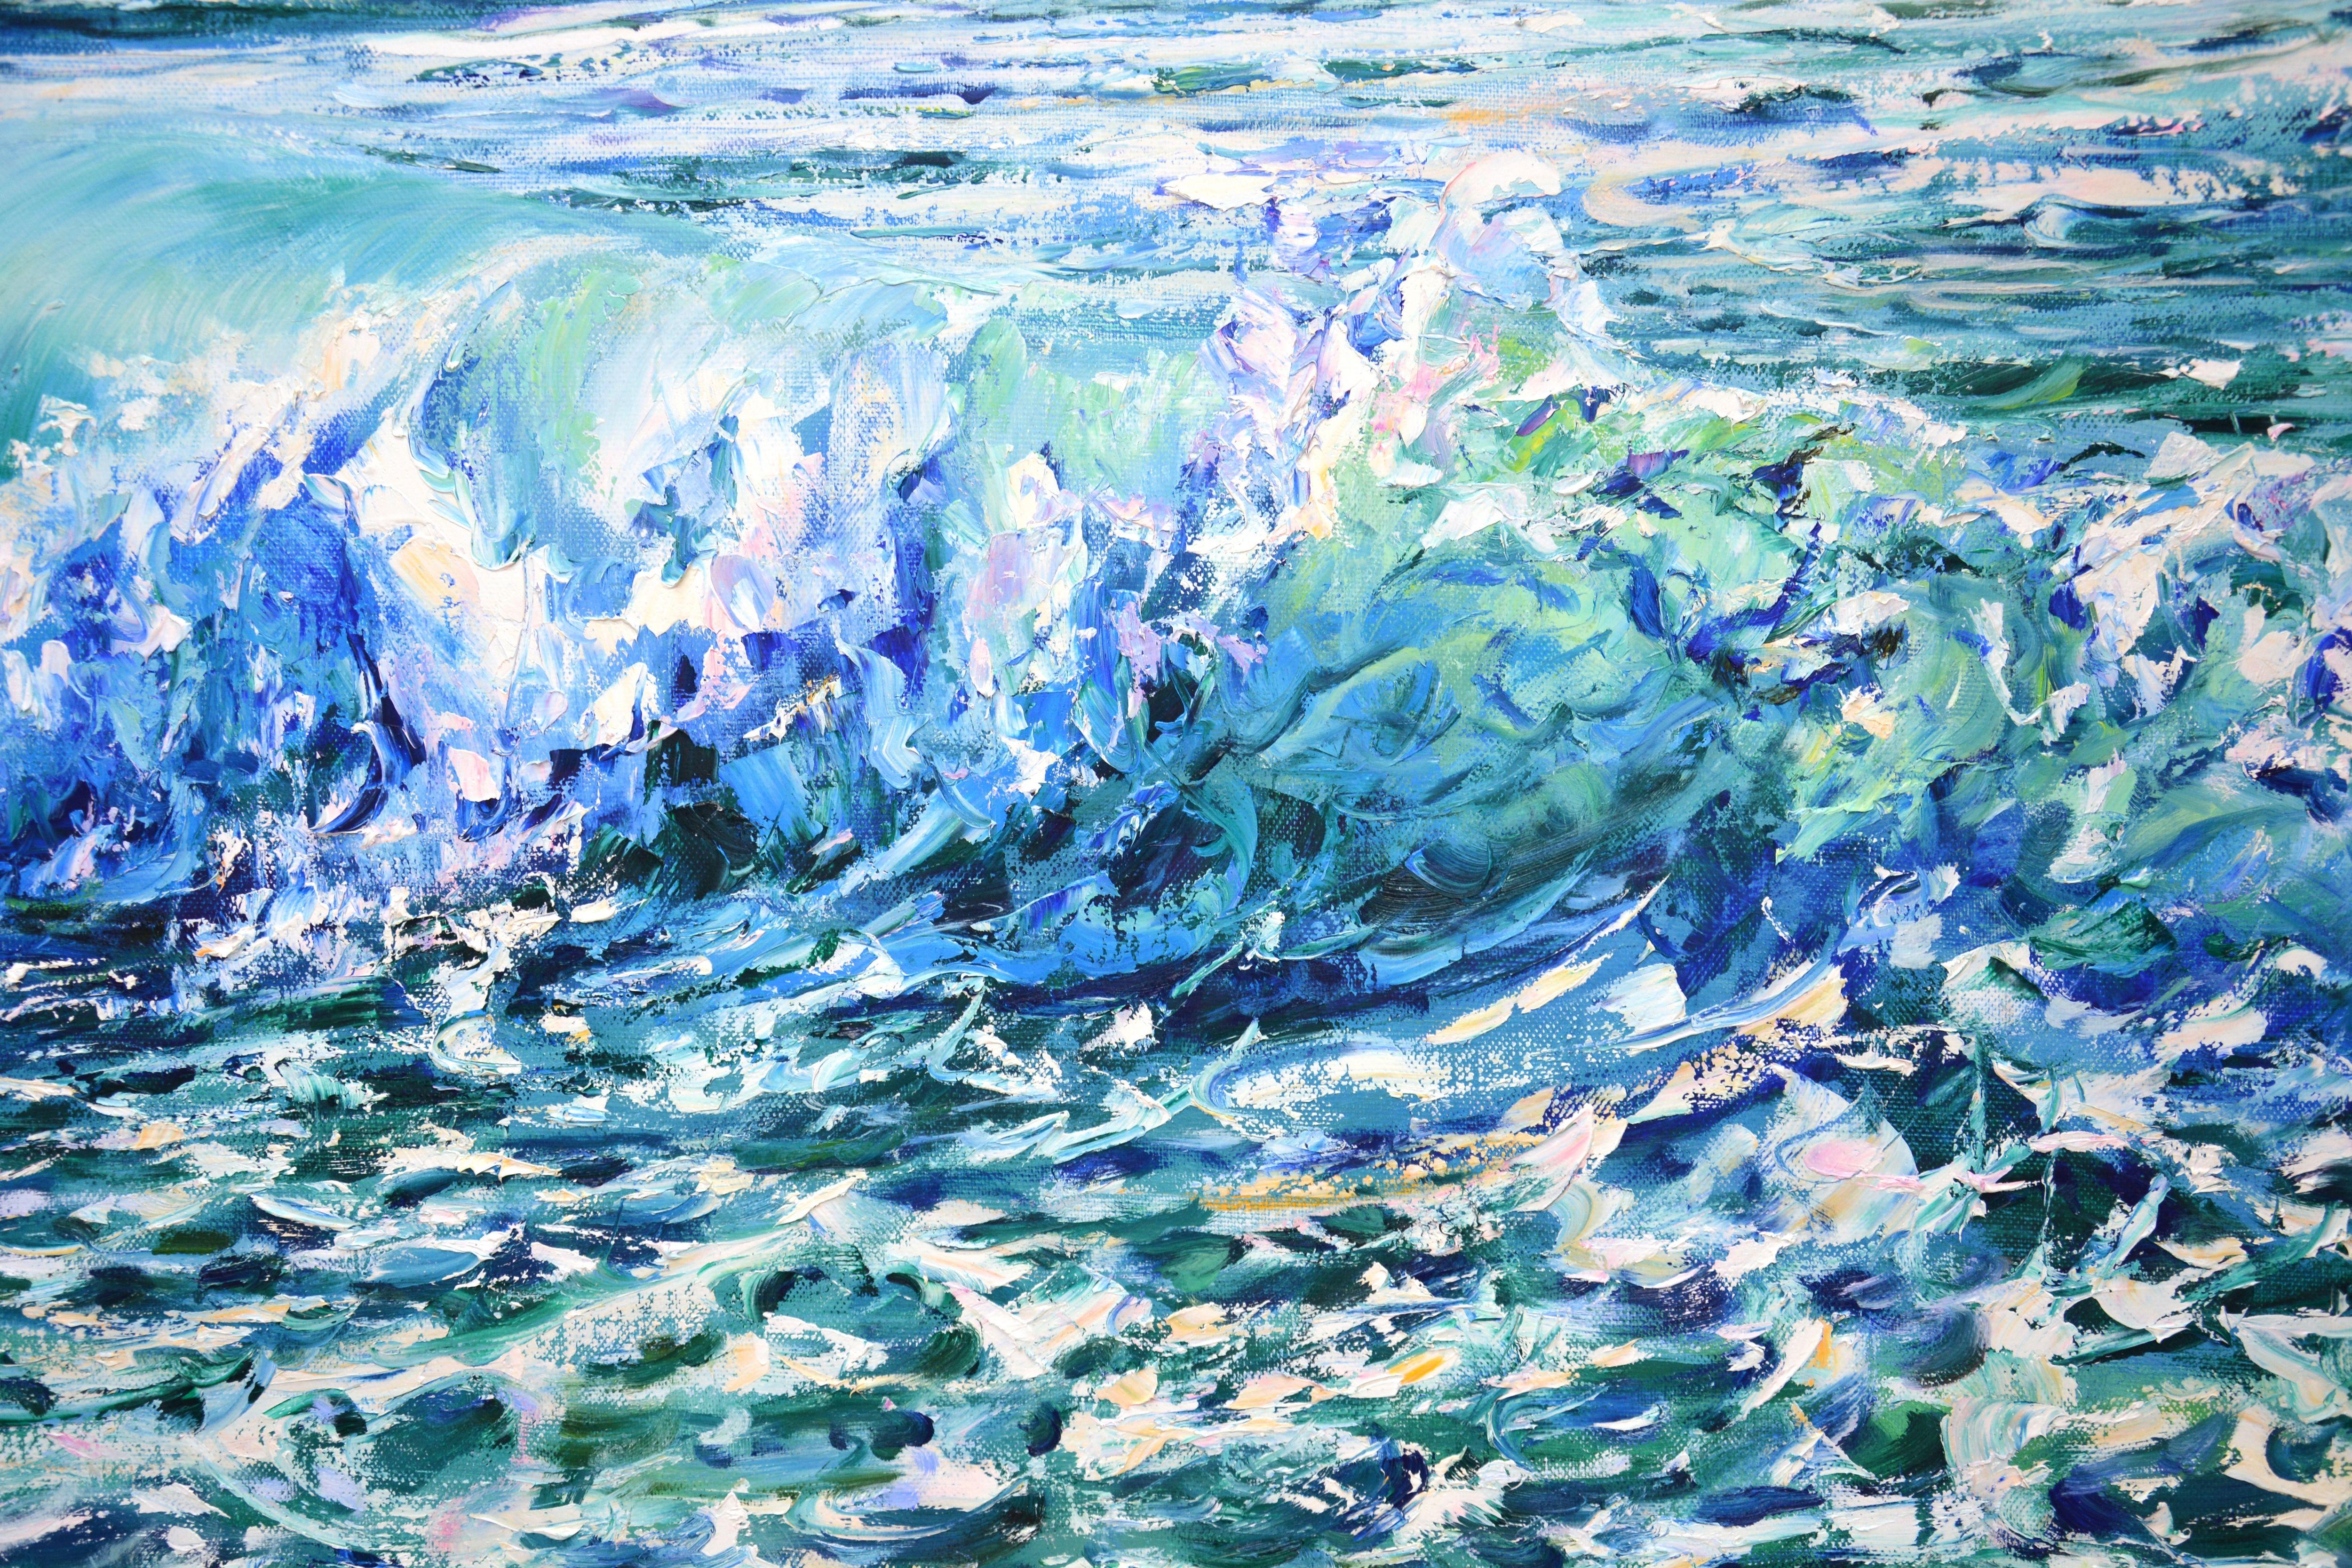 The ocean breathes with free wind, Painting, Oil on Canvas 2